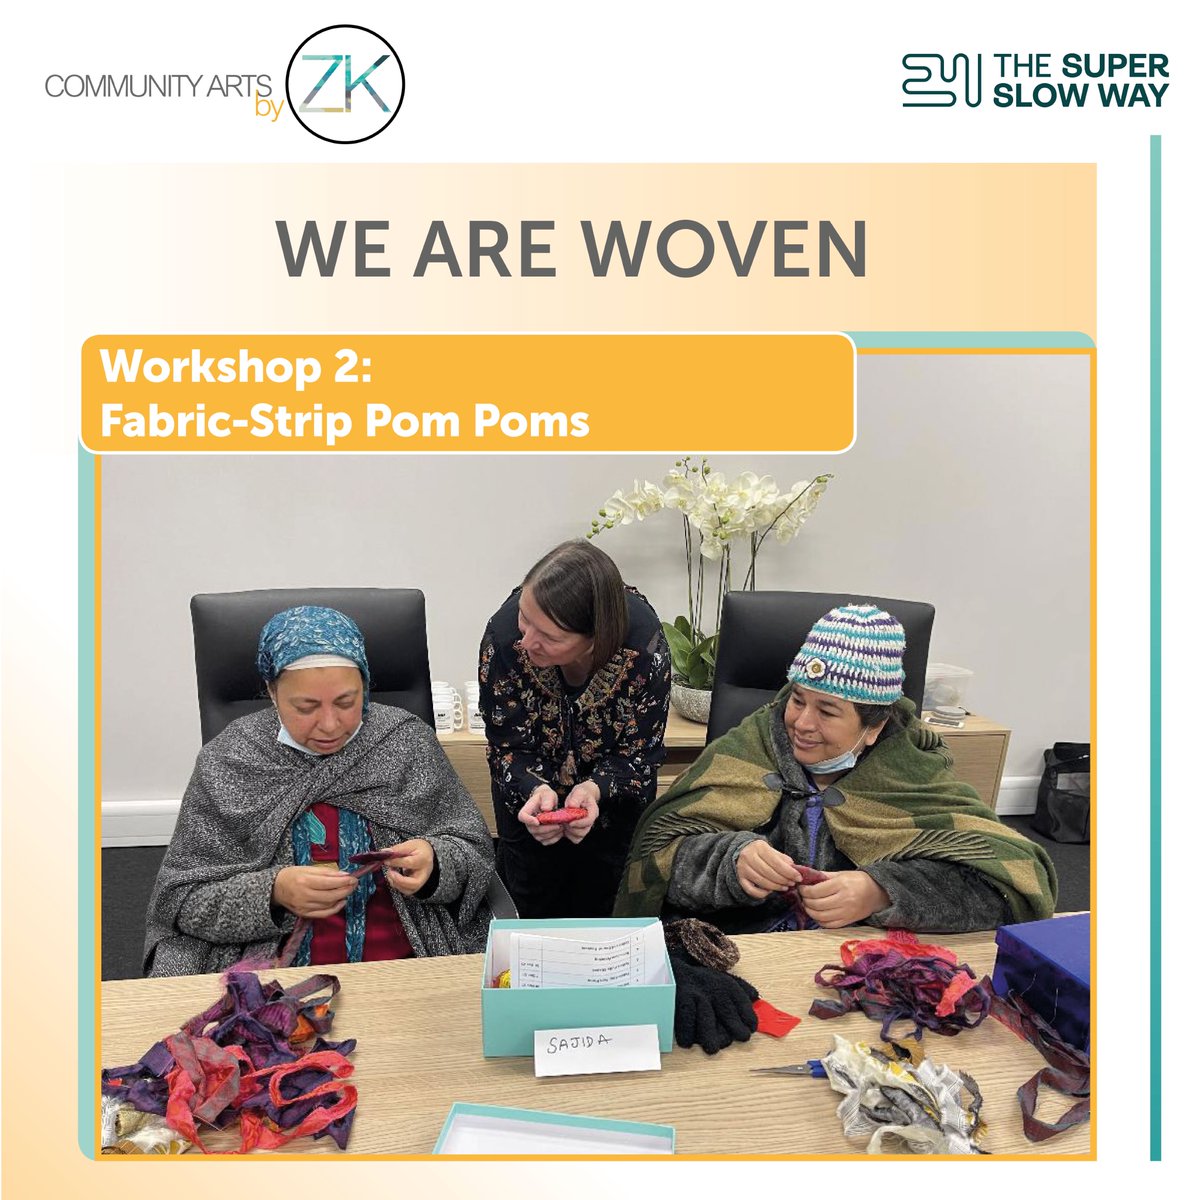 Workshop 2 of our fun WE ARE WOVEN project looked at making pom poms! Overseen by artist Jenny Waterson.
@InSitu_1 @Superslowway @ActivePendle @BPRCVS @rigby92 @PendleHillLP @WeAreLSCFT @NHSuk #communityartsbyzk #Creative #art #creativearts https://t.co/zk2wN8OJjl